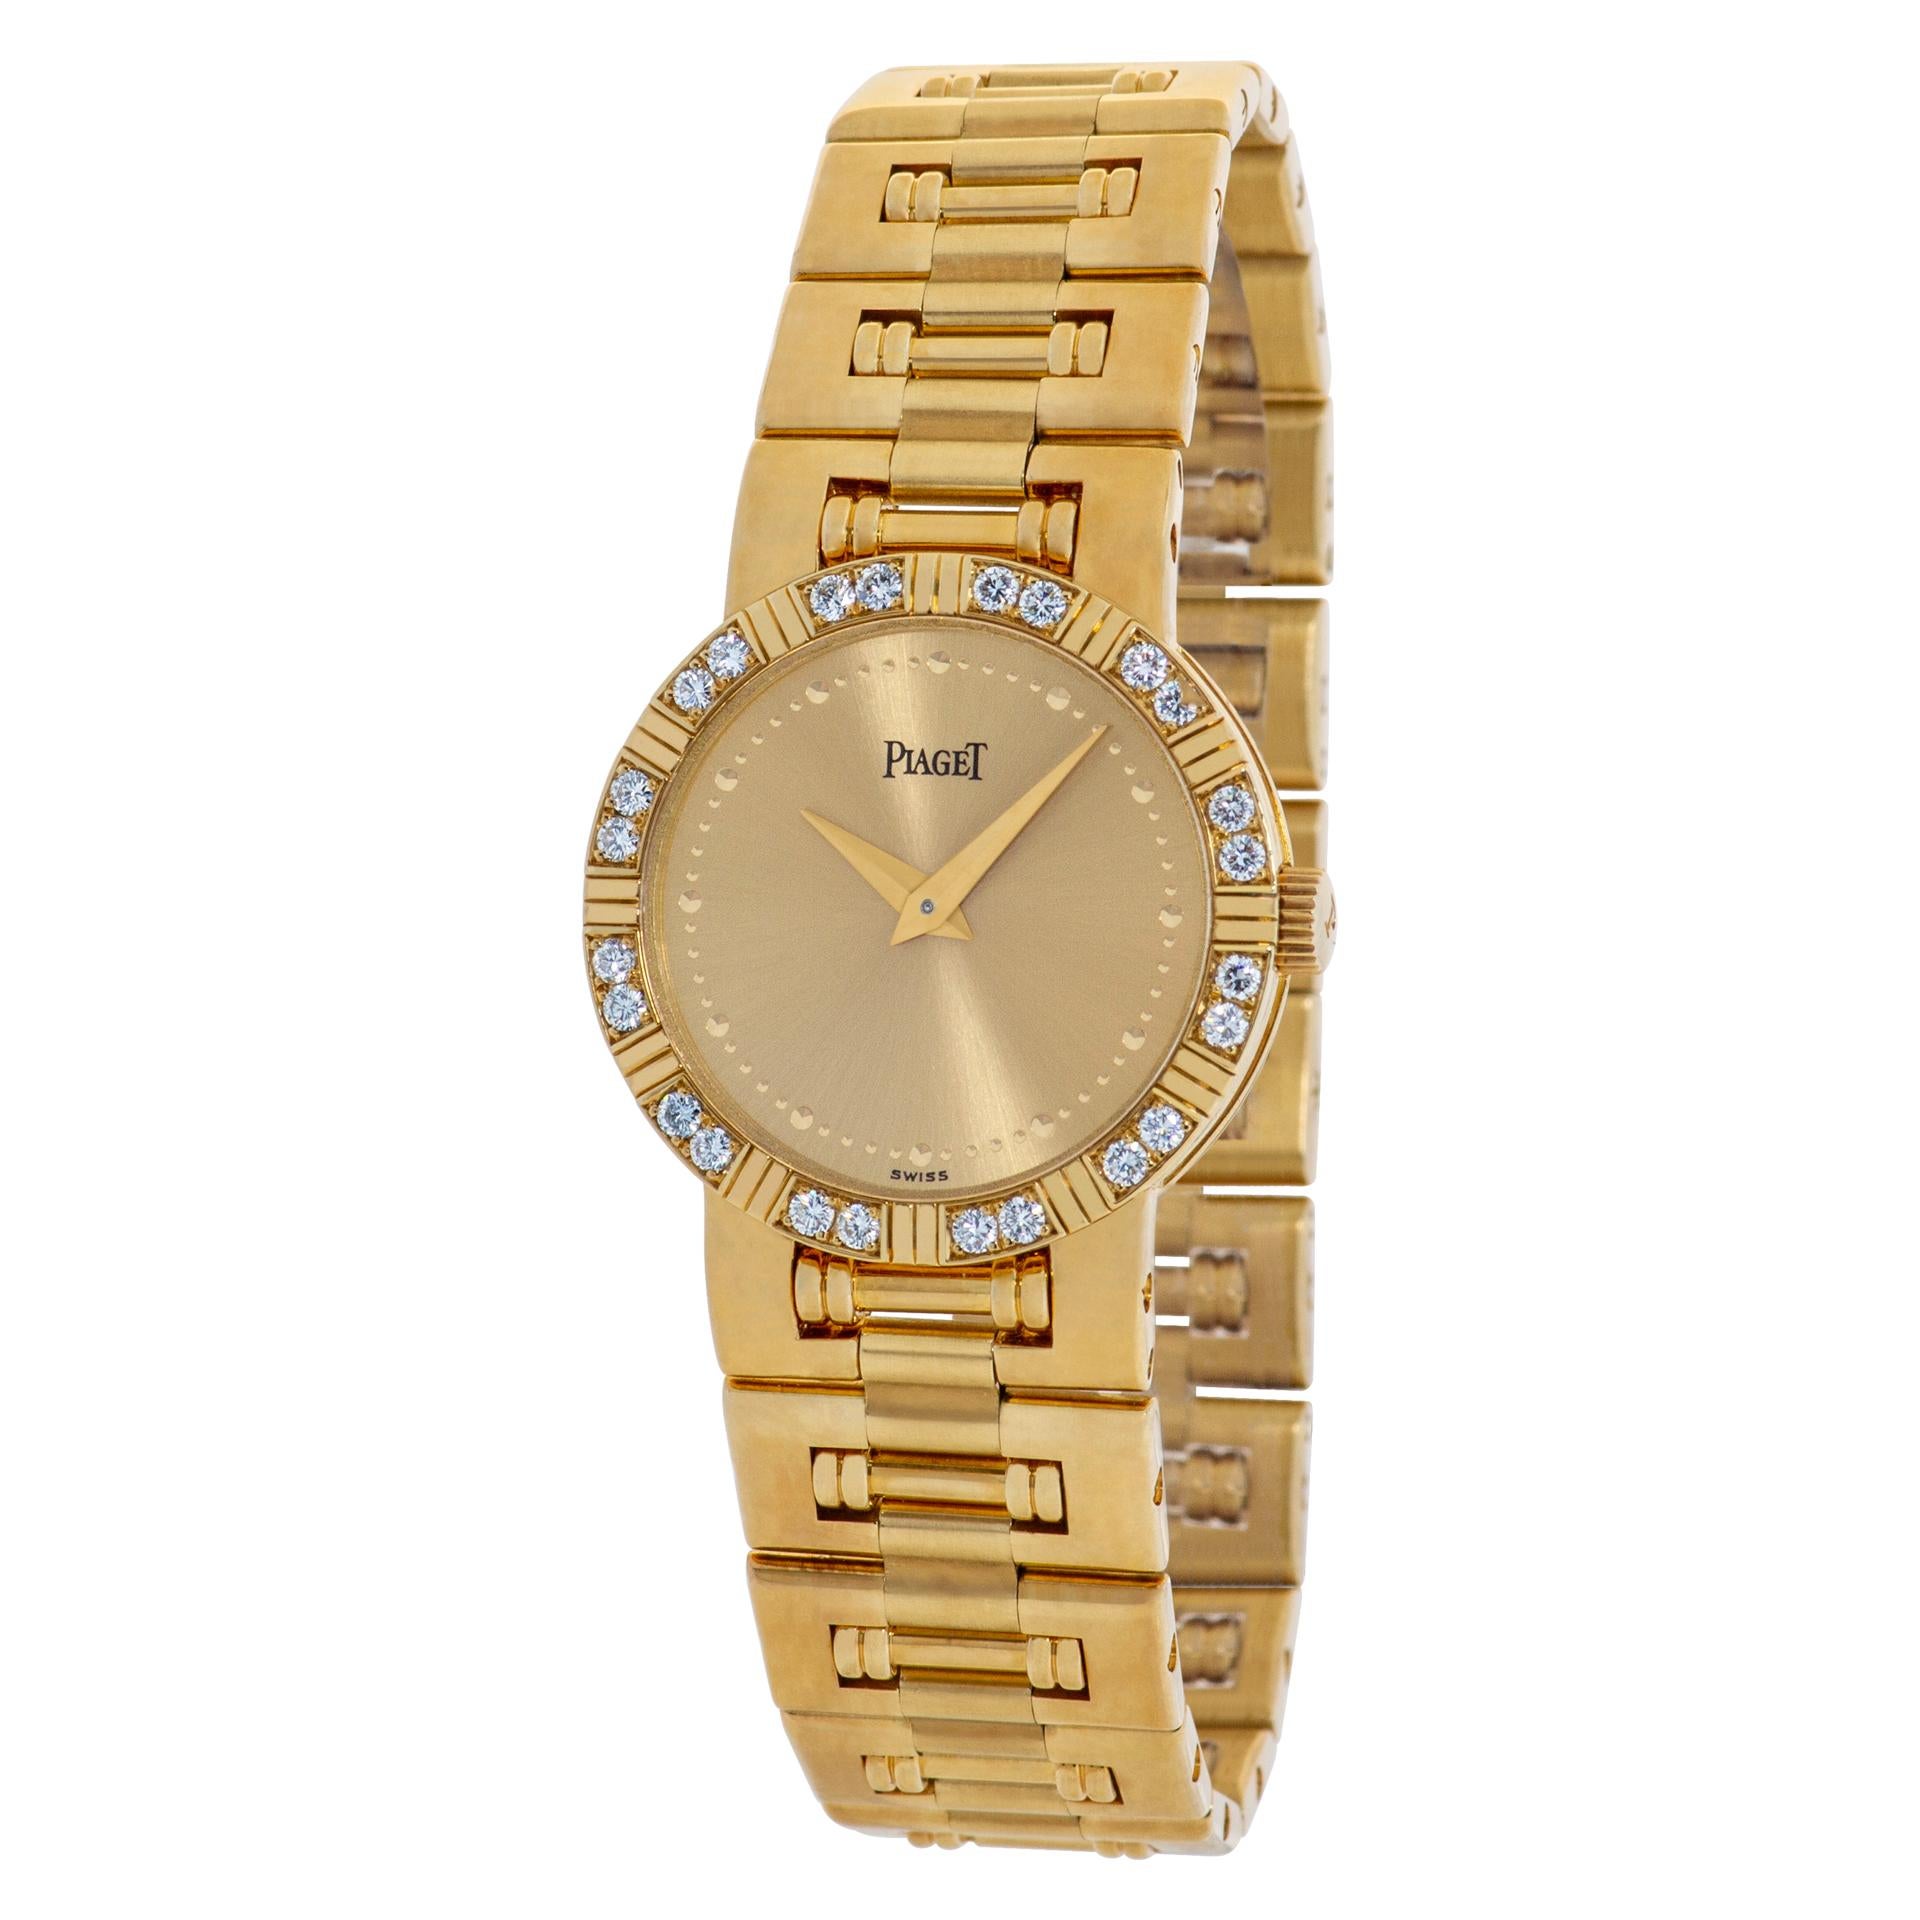 Piaget Dancer with original diamond bezel in 18k yellow gold. Quartz. Ref 90564K81. 23mm case size. With papers. 6.25